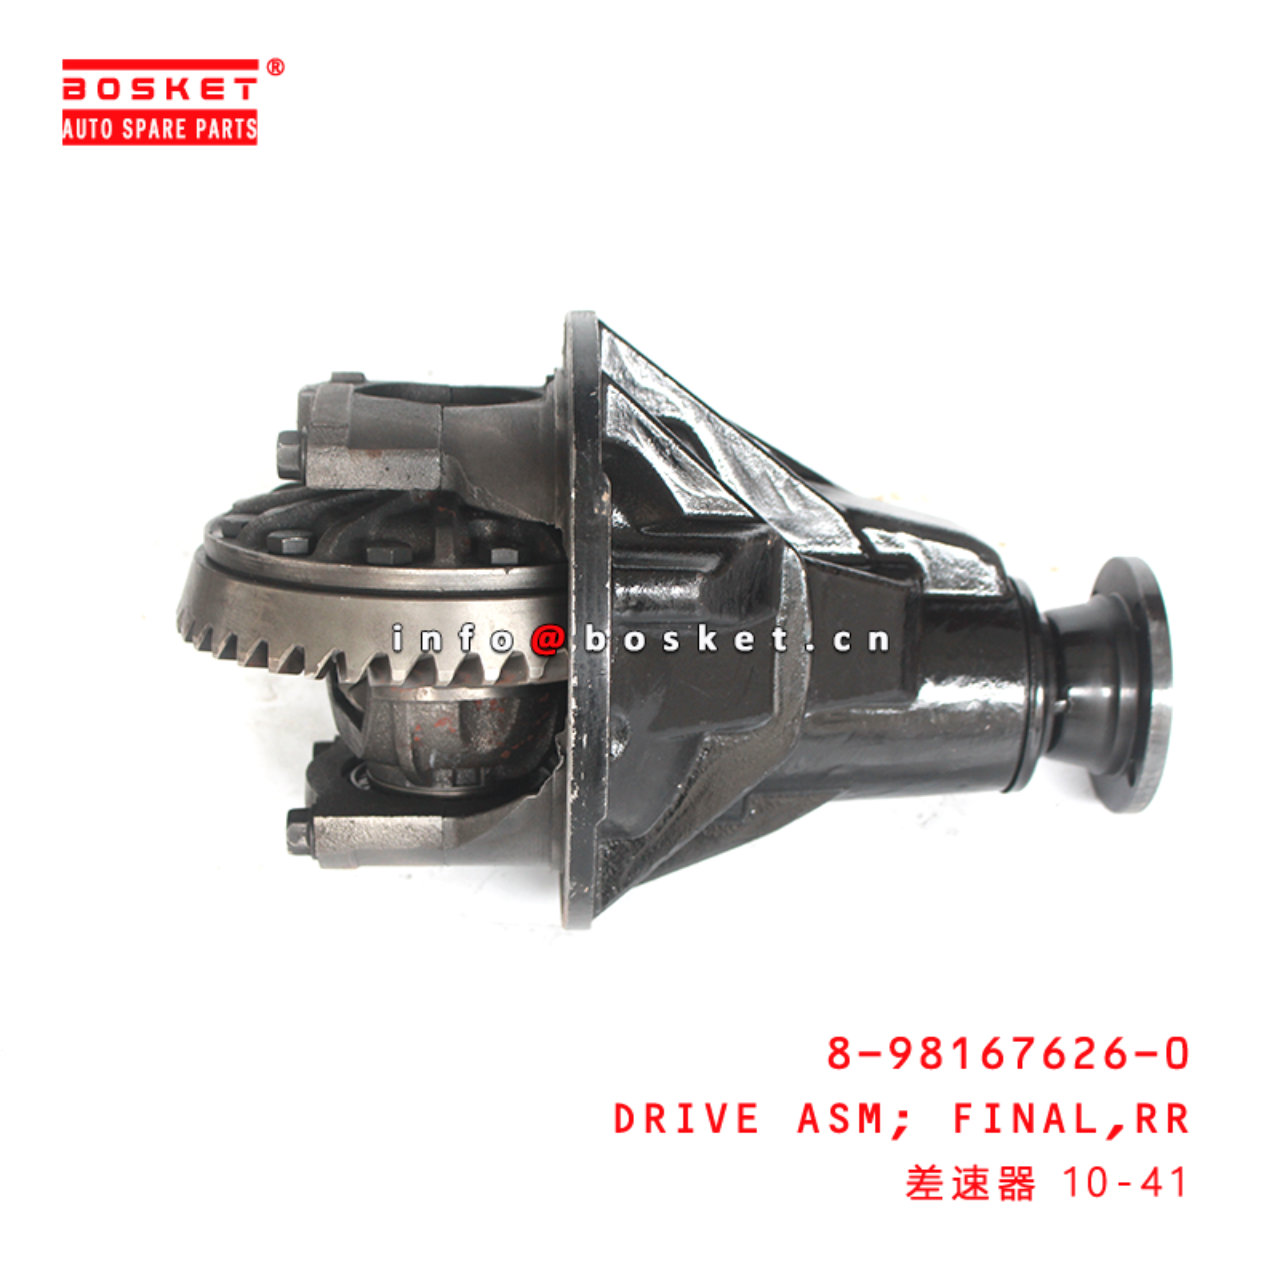 8-98167626-0 Rear Final Drive Assembly Suitable for ISUZU DMAX 8981676260